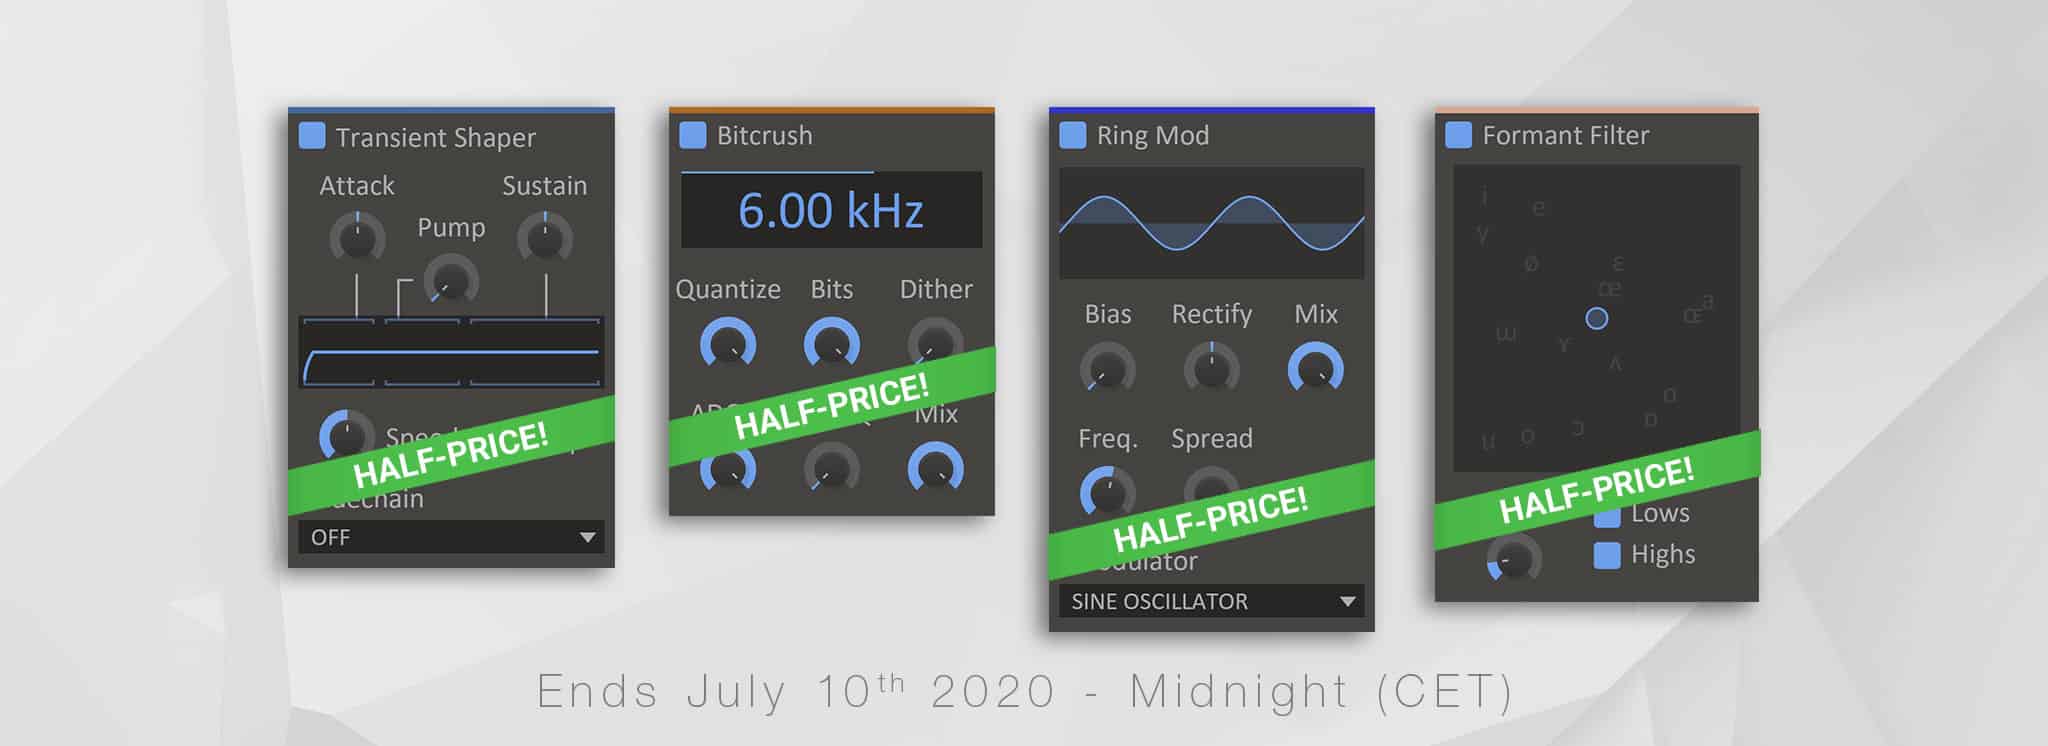 Kilohearts  SALE: 50% off Transient Shaper, Bitcrush, Ring Mod, and Formant Filter